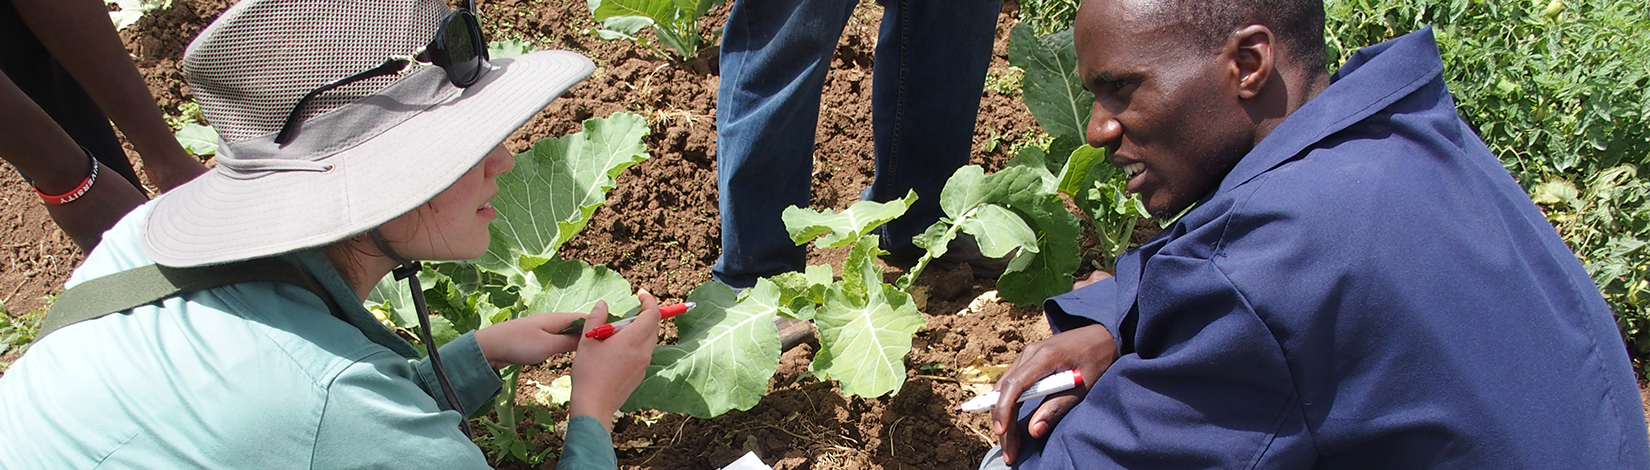 Female student kneels next to plants while conversing with male Kenyan farmer.